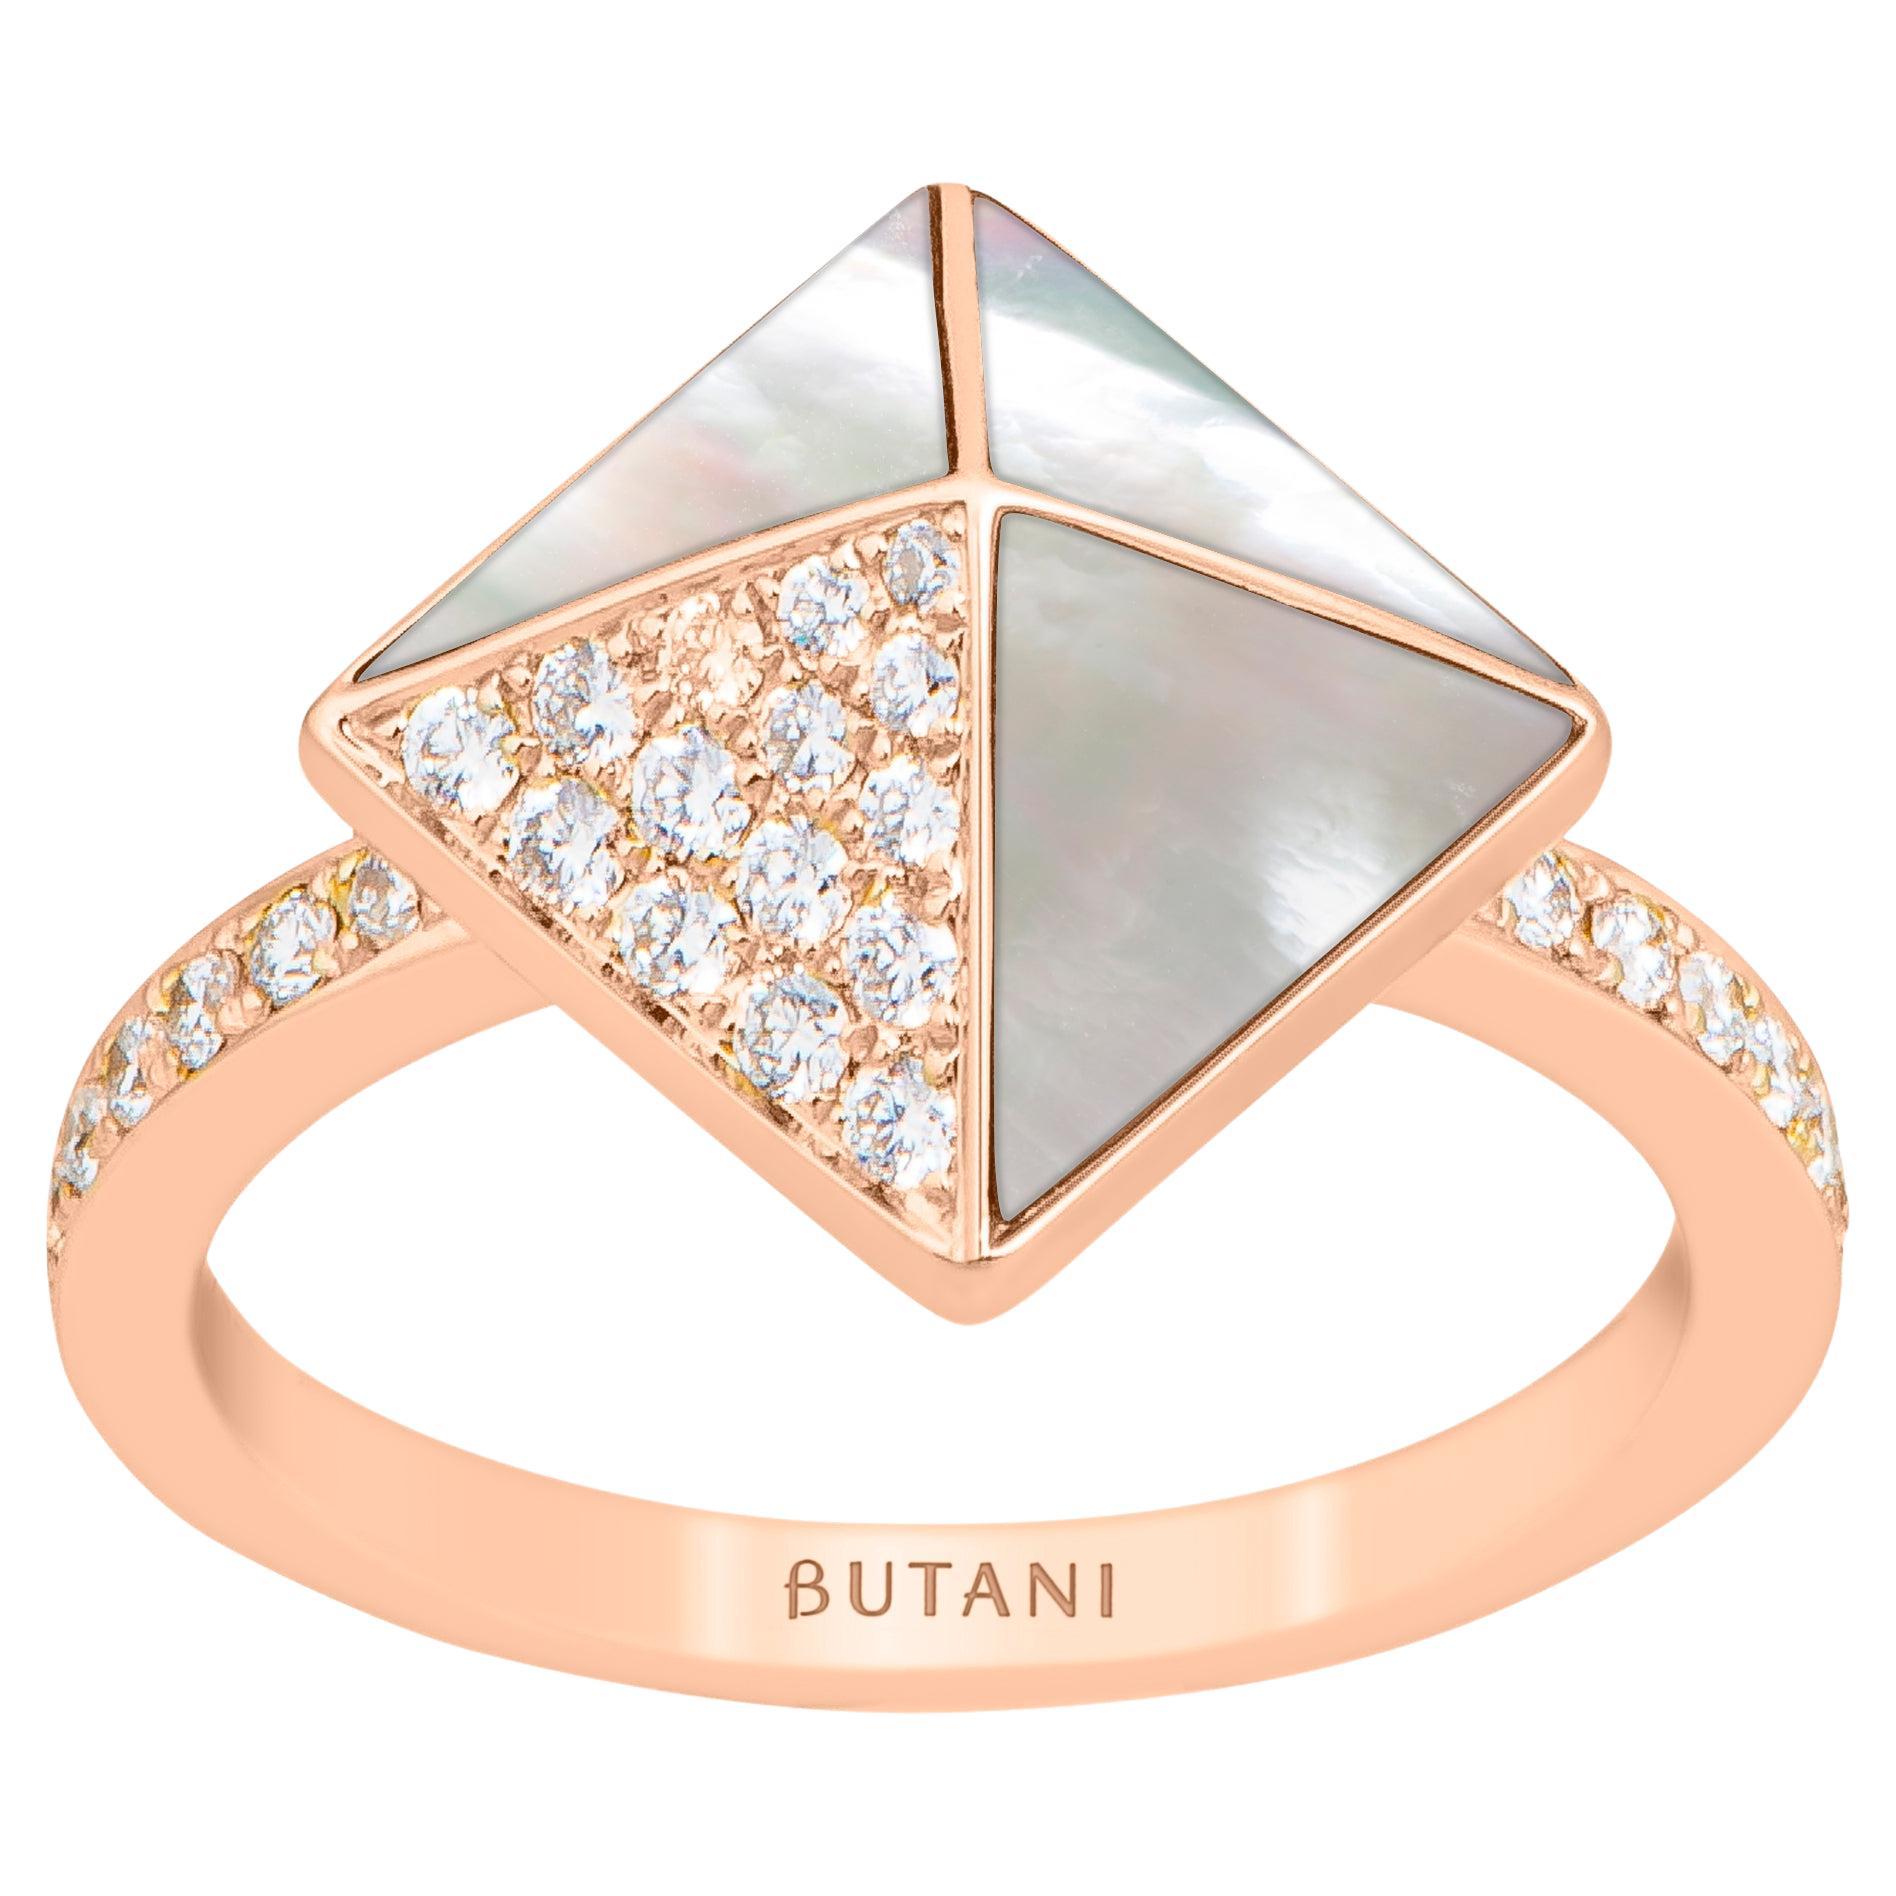 Tetra Apex Ring with White Mother of Pearl and Diamonds in 18k Rose Gold